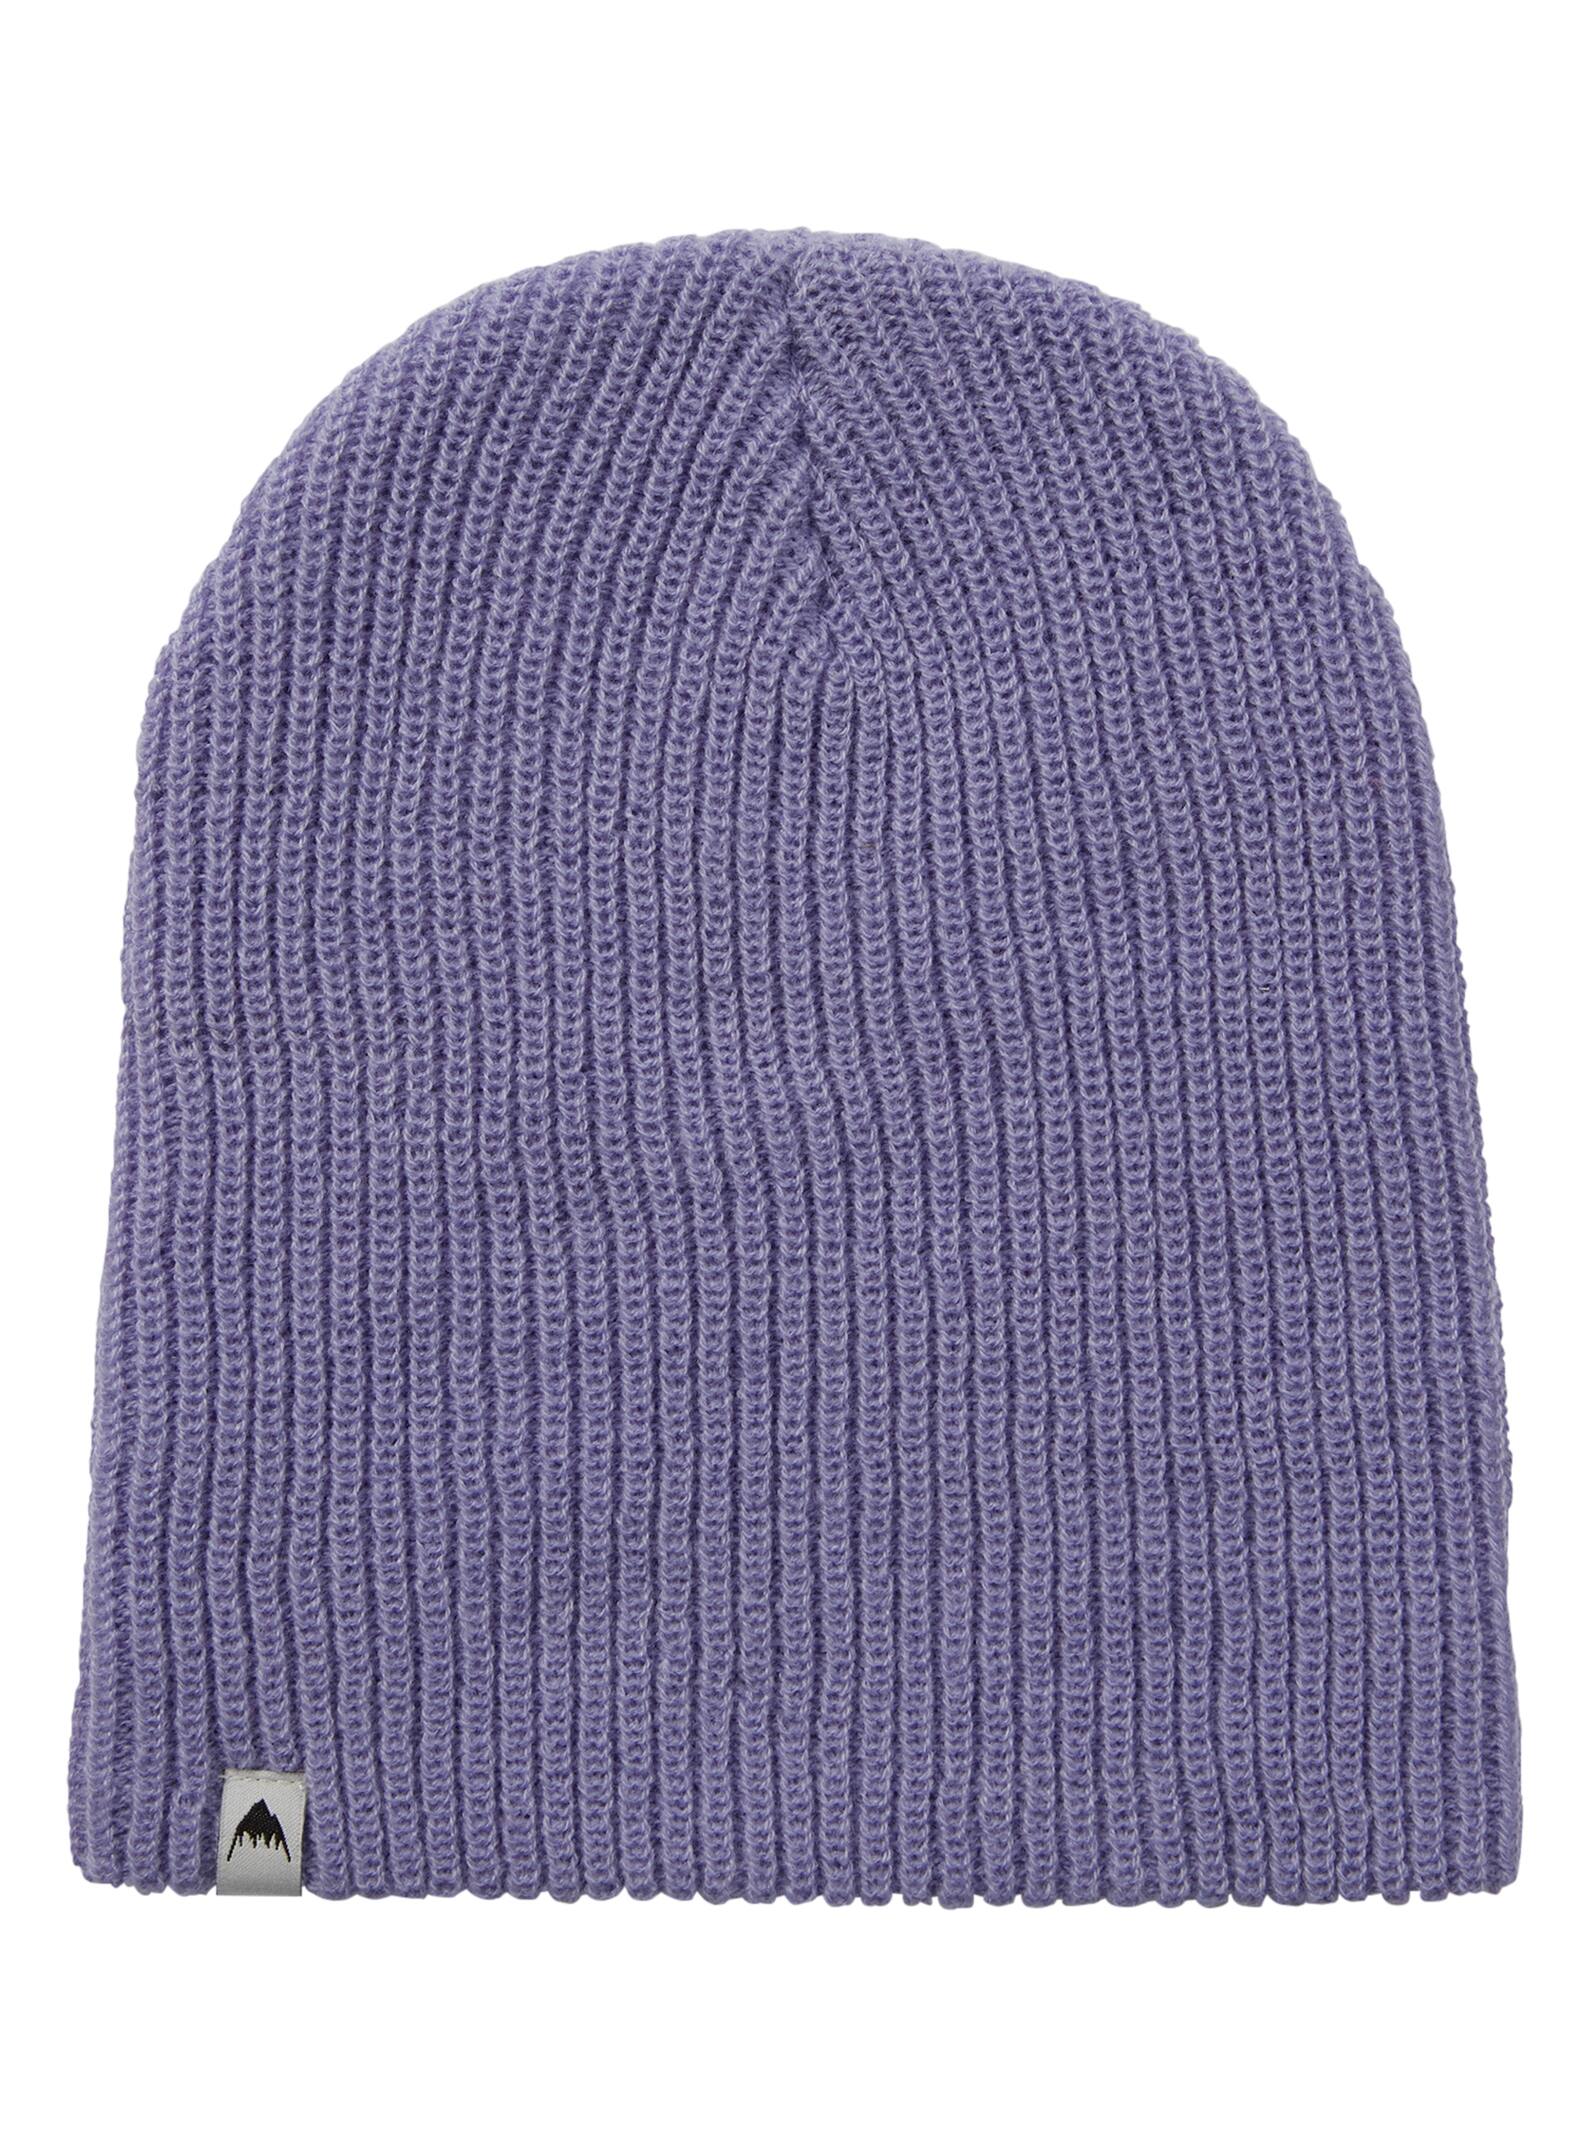 BOYS REVERSIBLE SCOTLAND KNITTED BEANIE HAT 